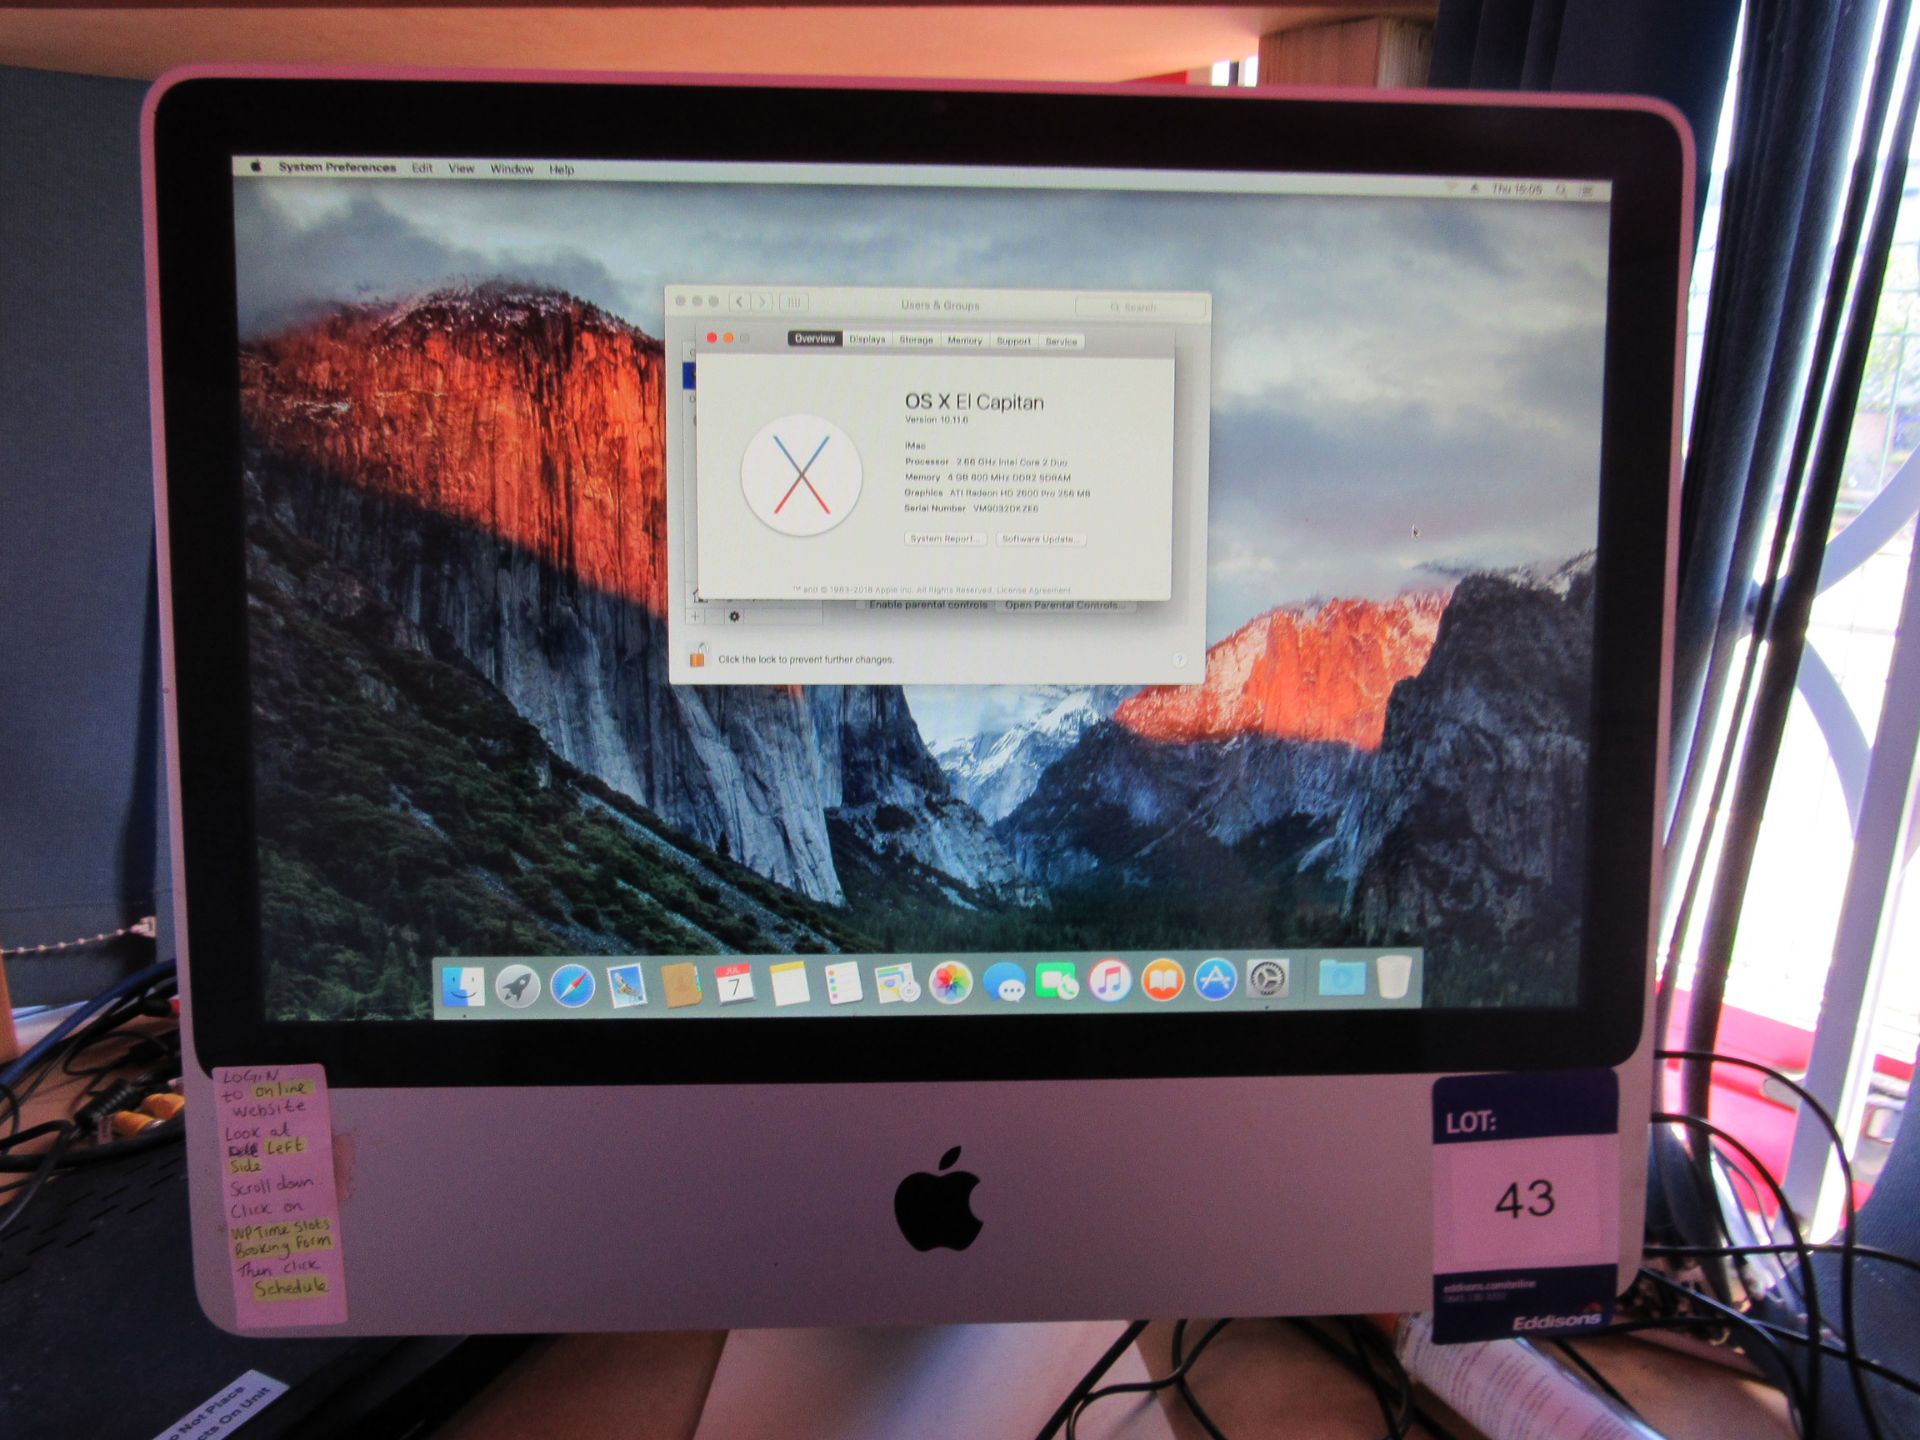 Apple iMac 2.66GHz, Intel Core 2 Duo, 4GB Ram 800MHz, 20in Display, 500GB HDD. Located at - Image 2 of 6